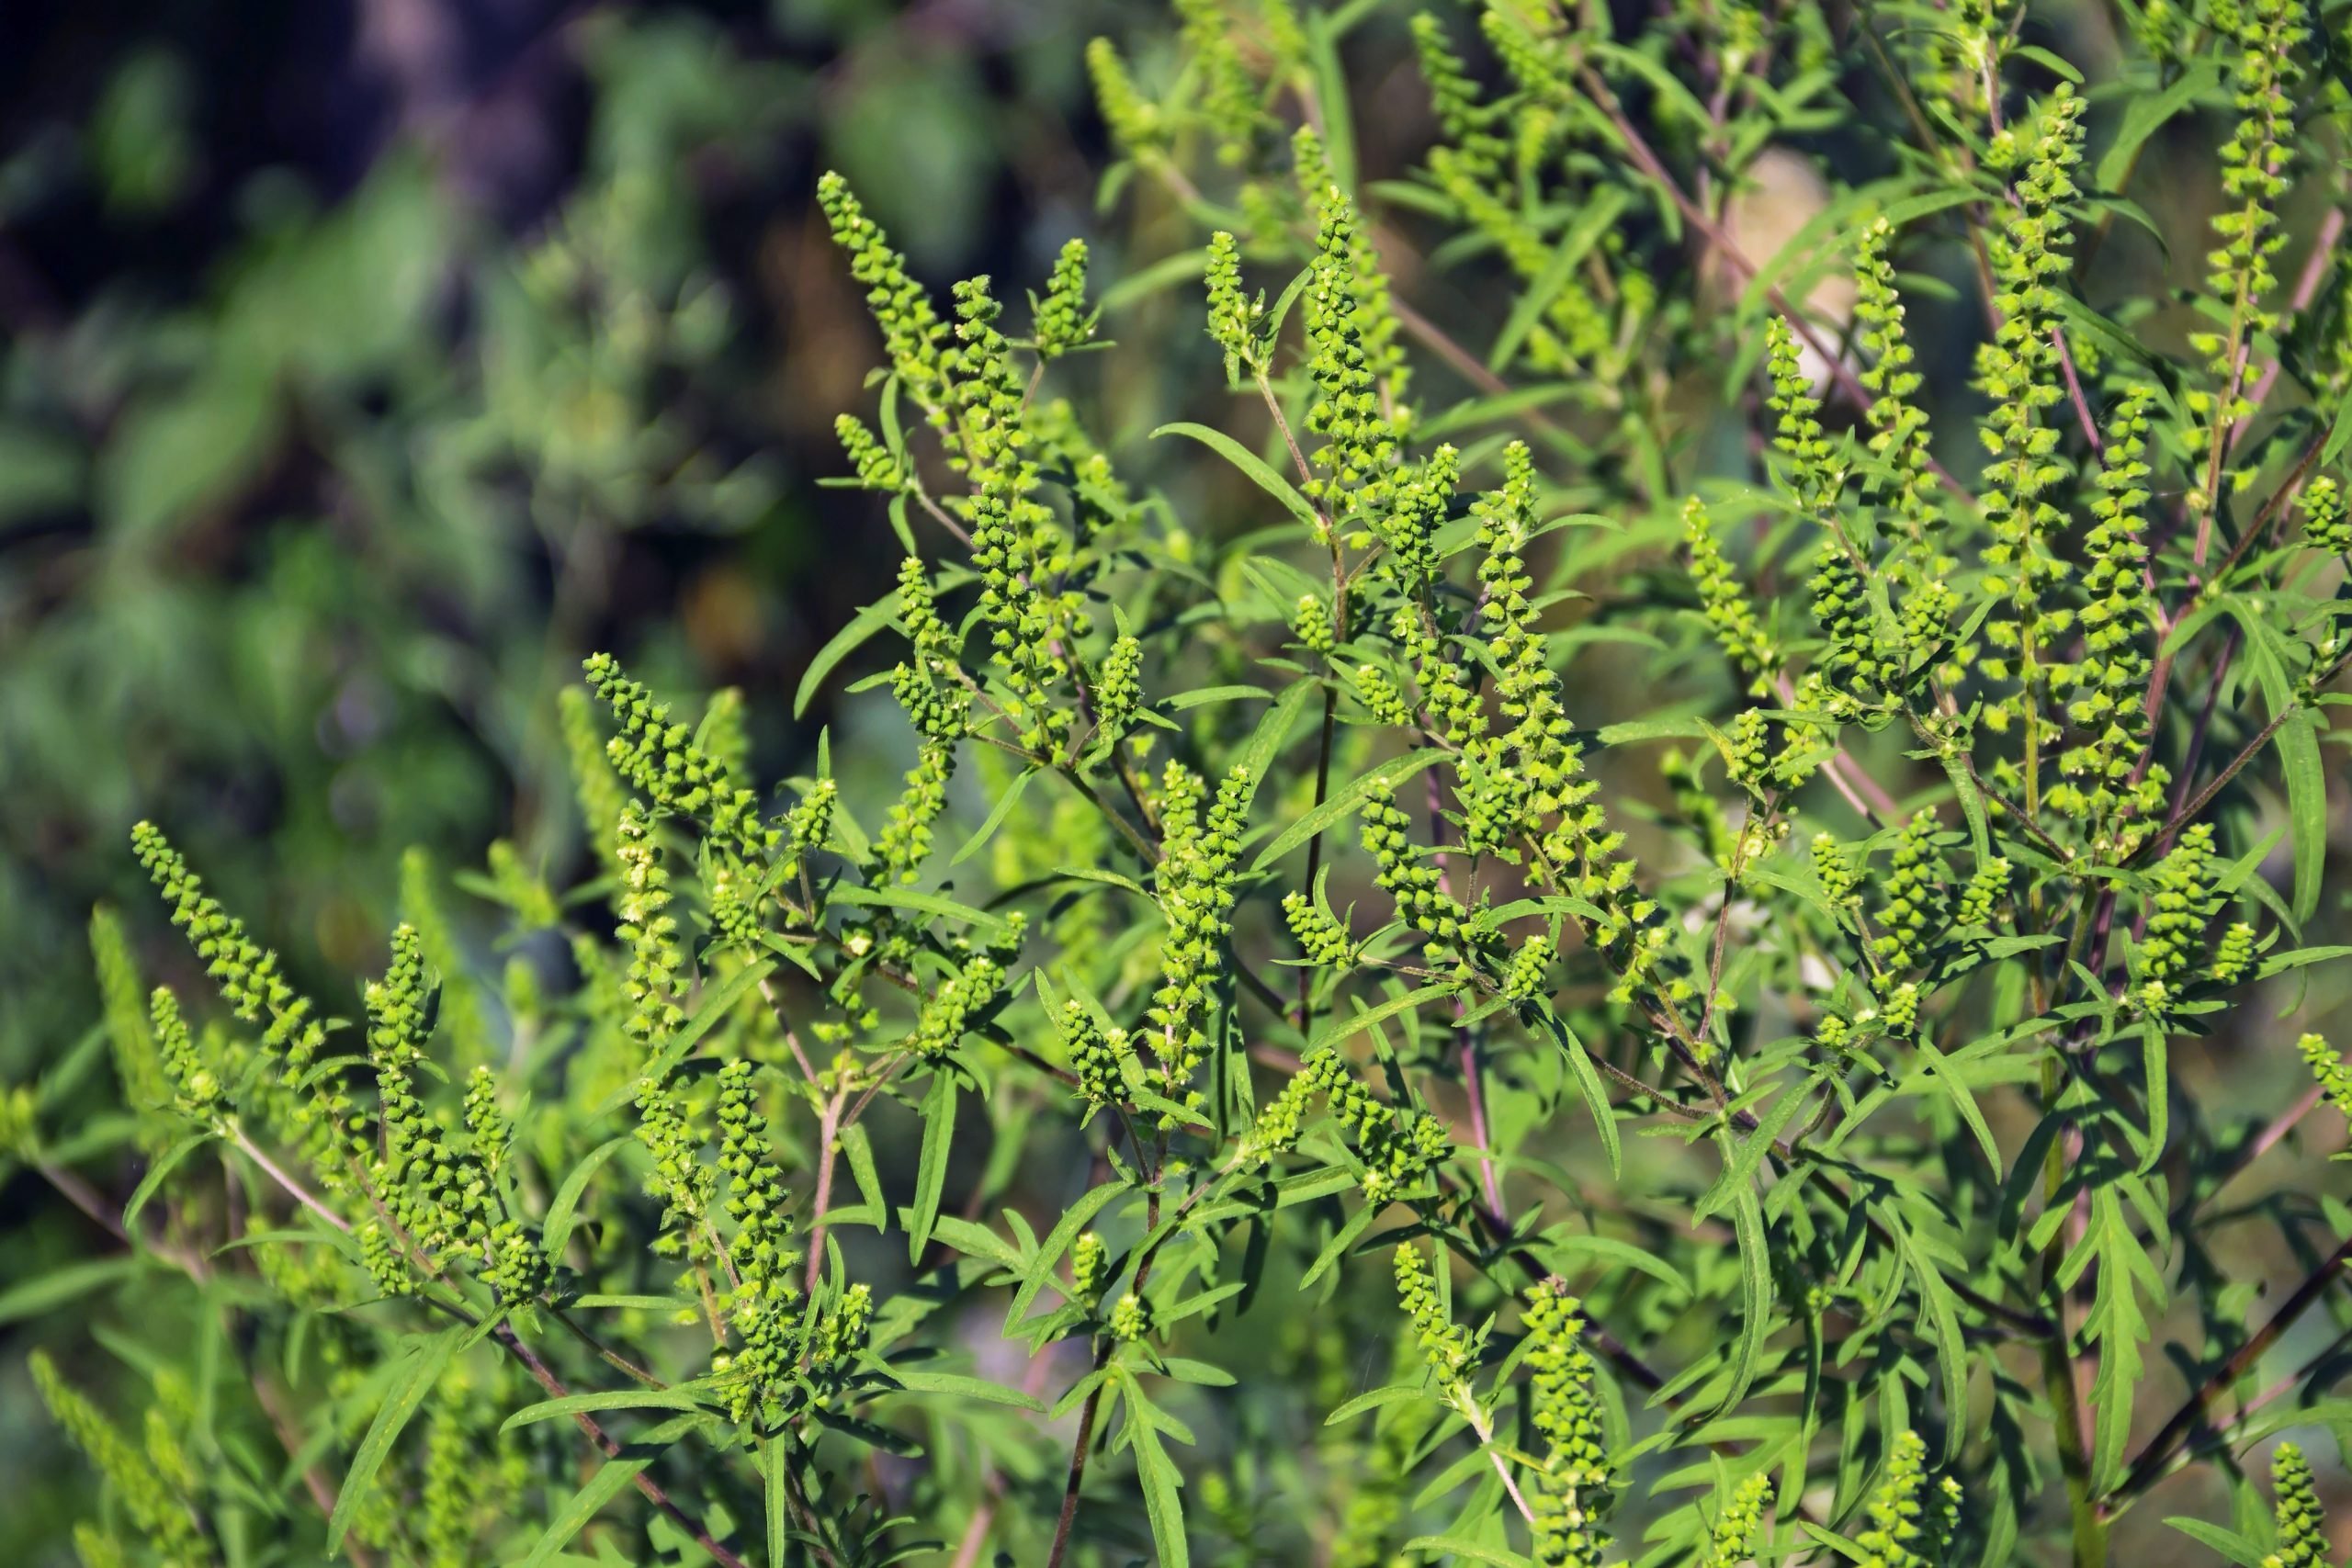 ragweed-vs-goldenrod-what-s-growing-in-your-yard-birds-and-blooms